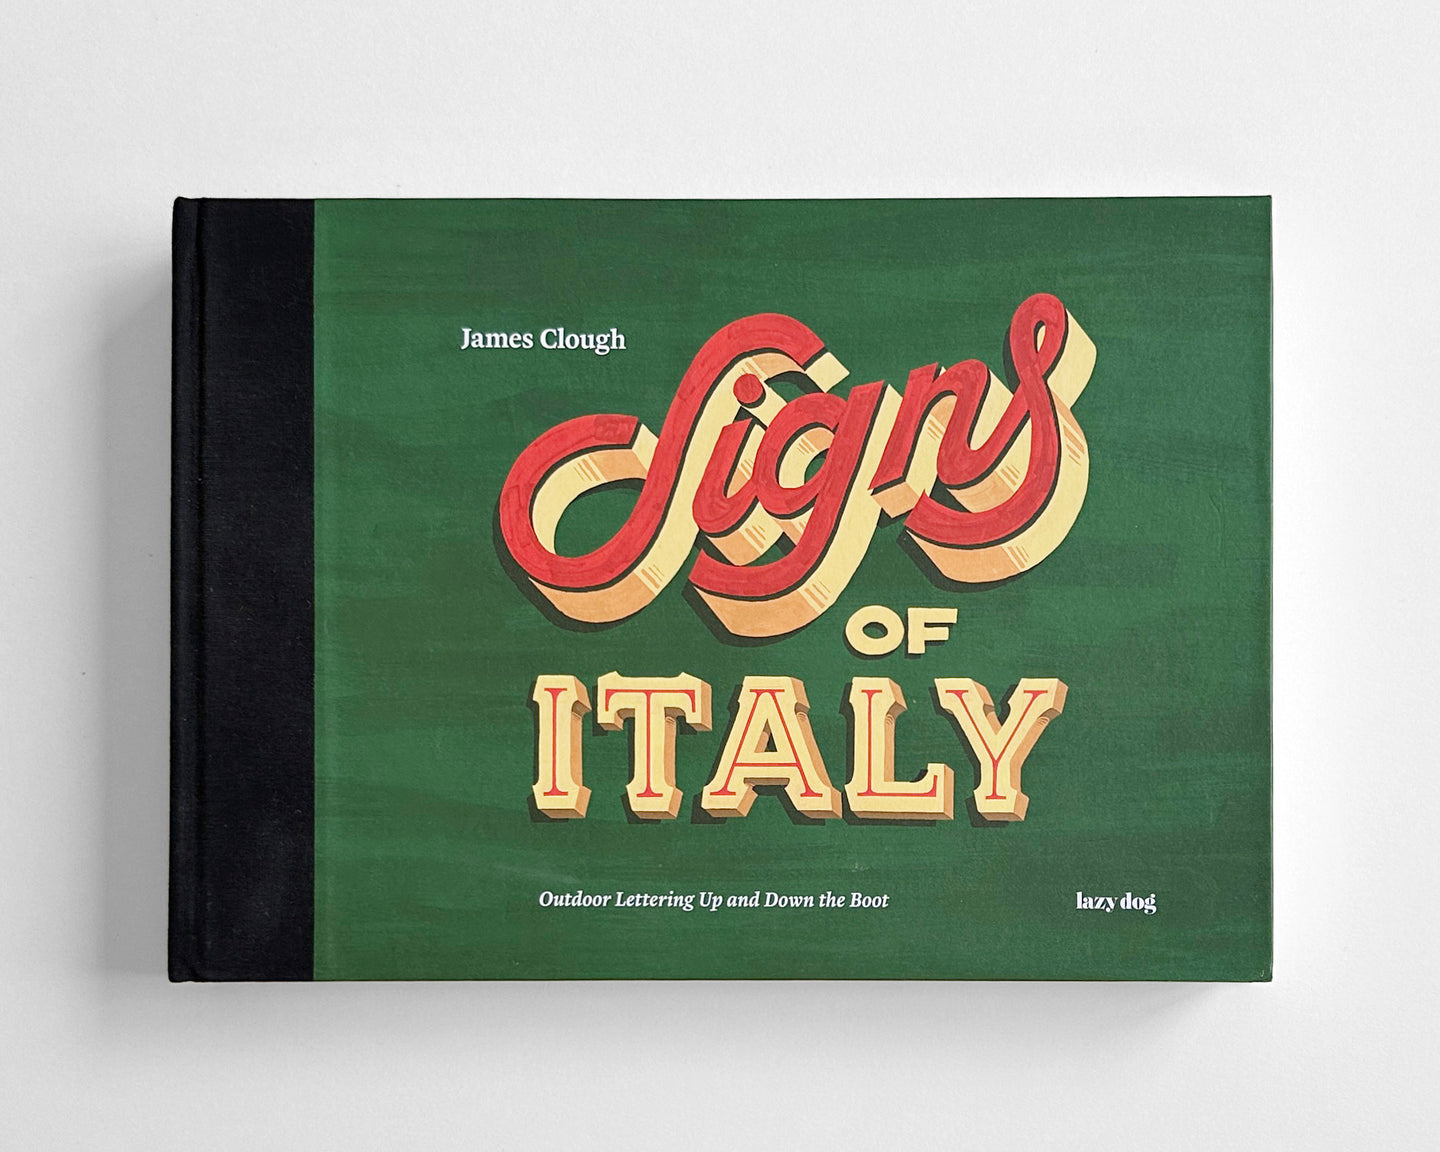 Signs of Italy: Outdoor Lettering Up and Down the Boot [James Clough]